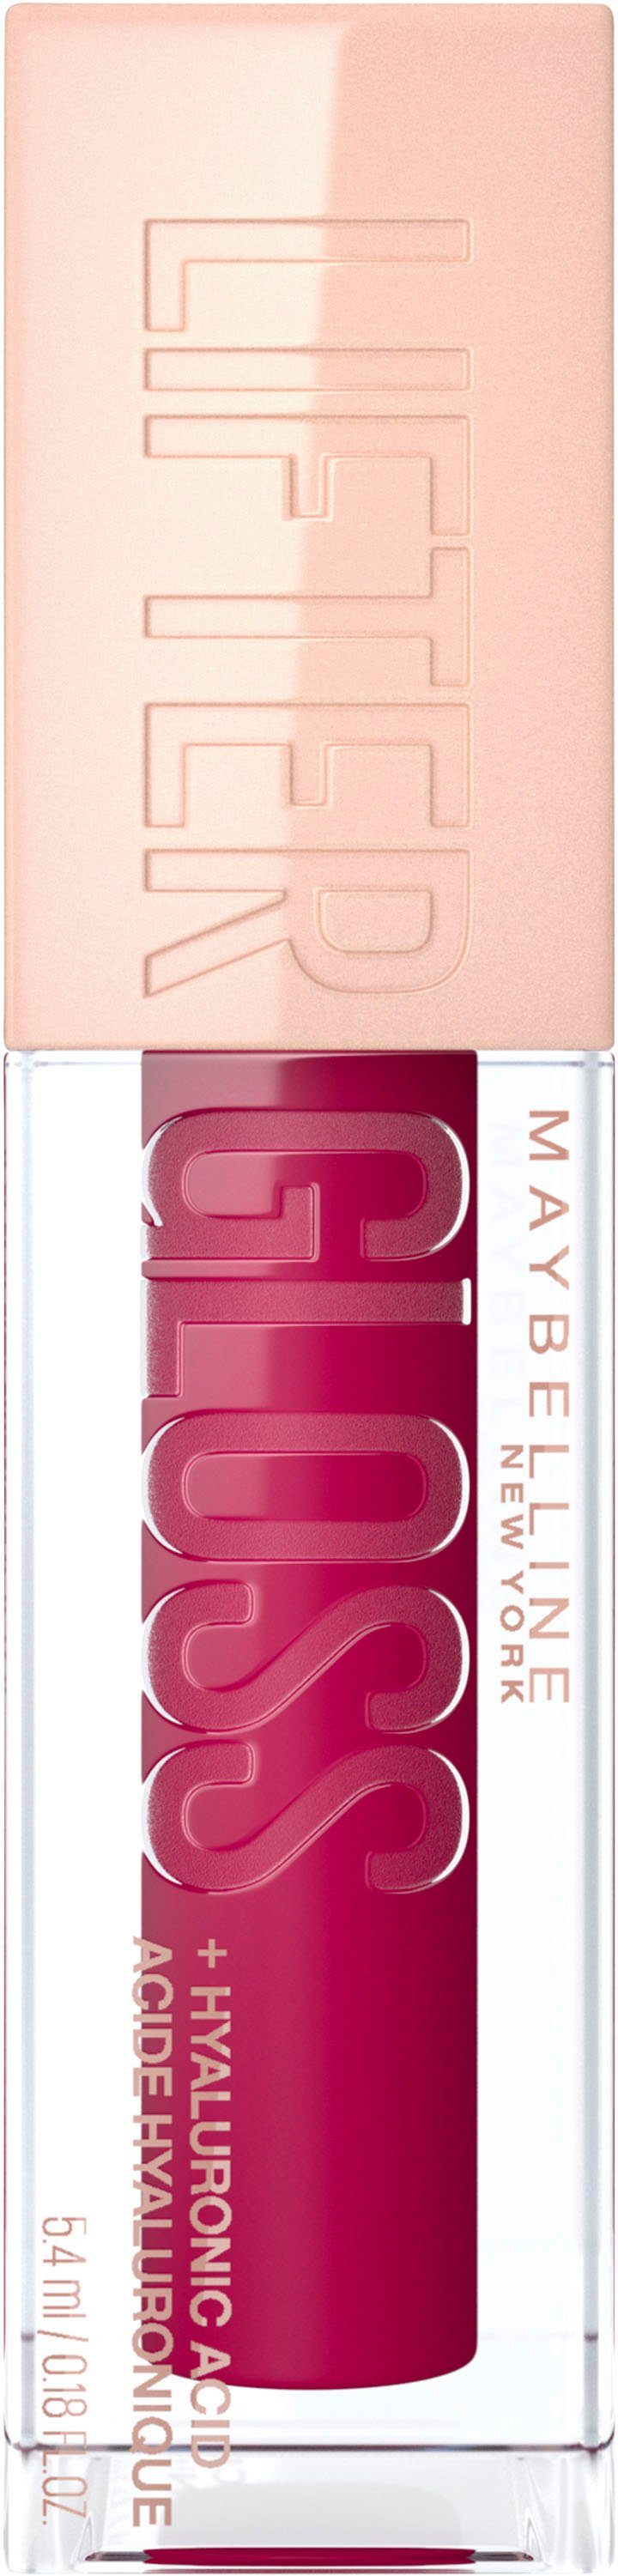 MAYBELLINE NEW YORK Maybelline Lifter Lipgloss New Gloss York